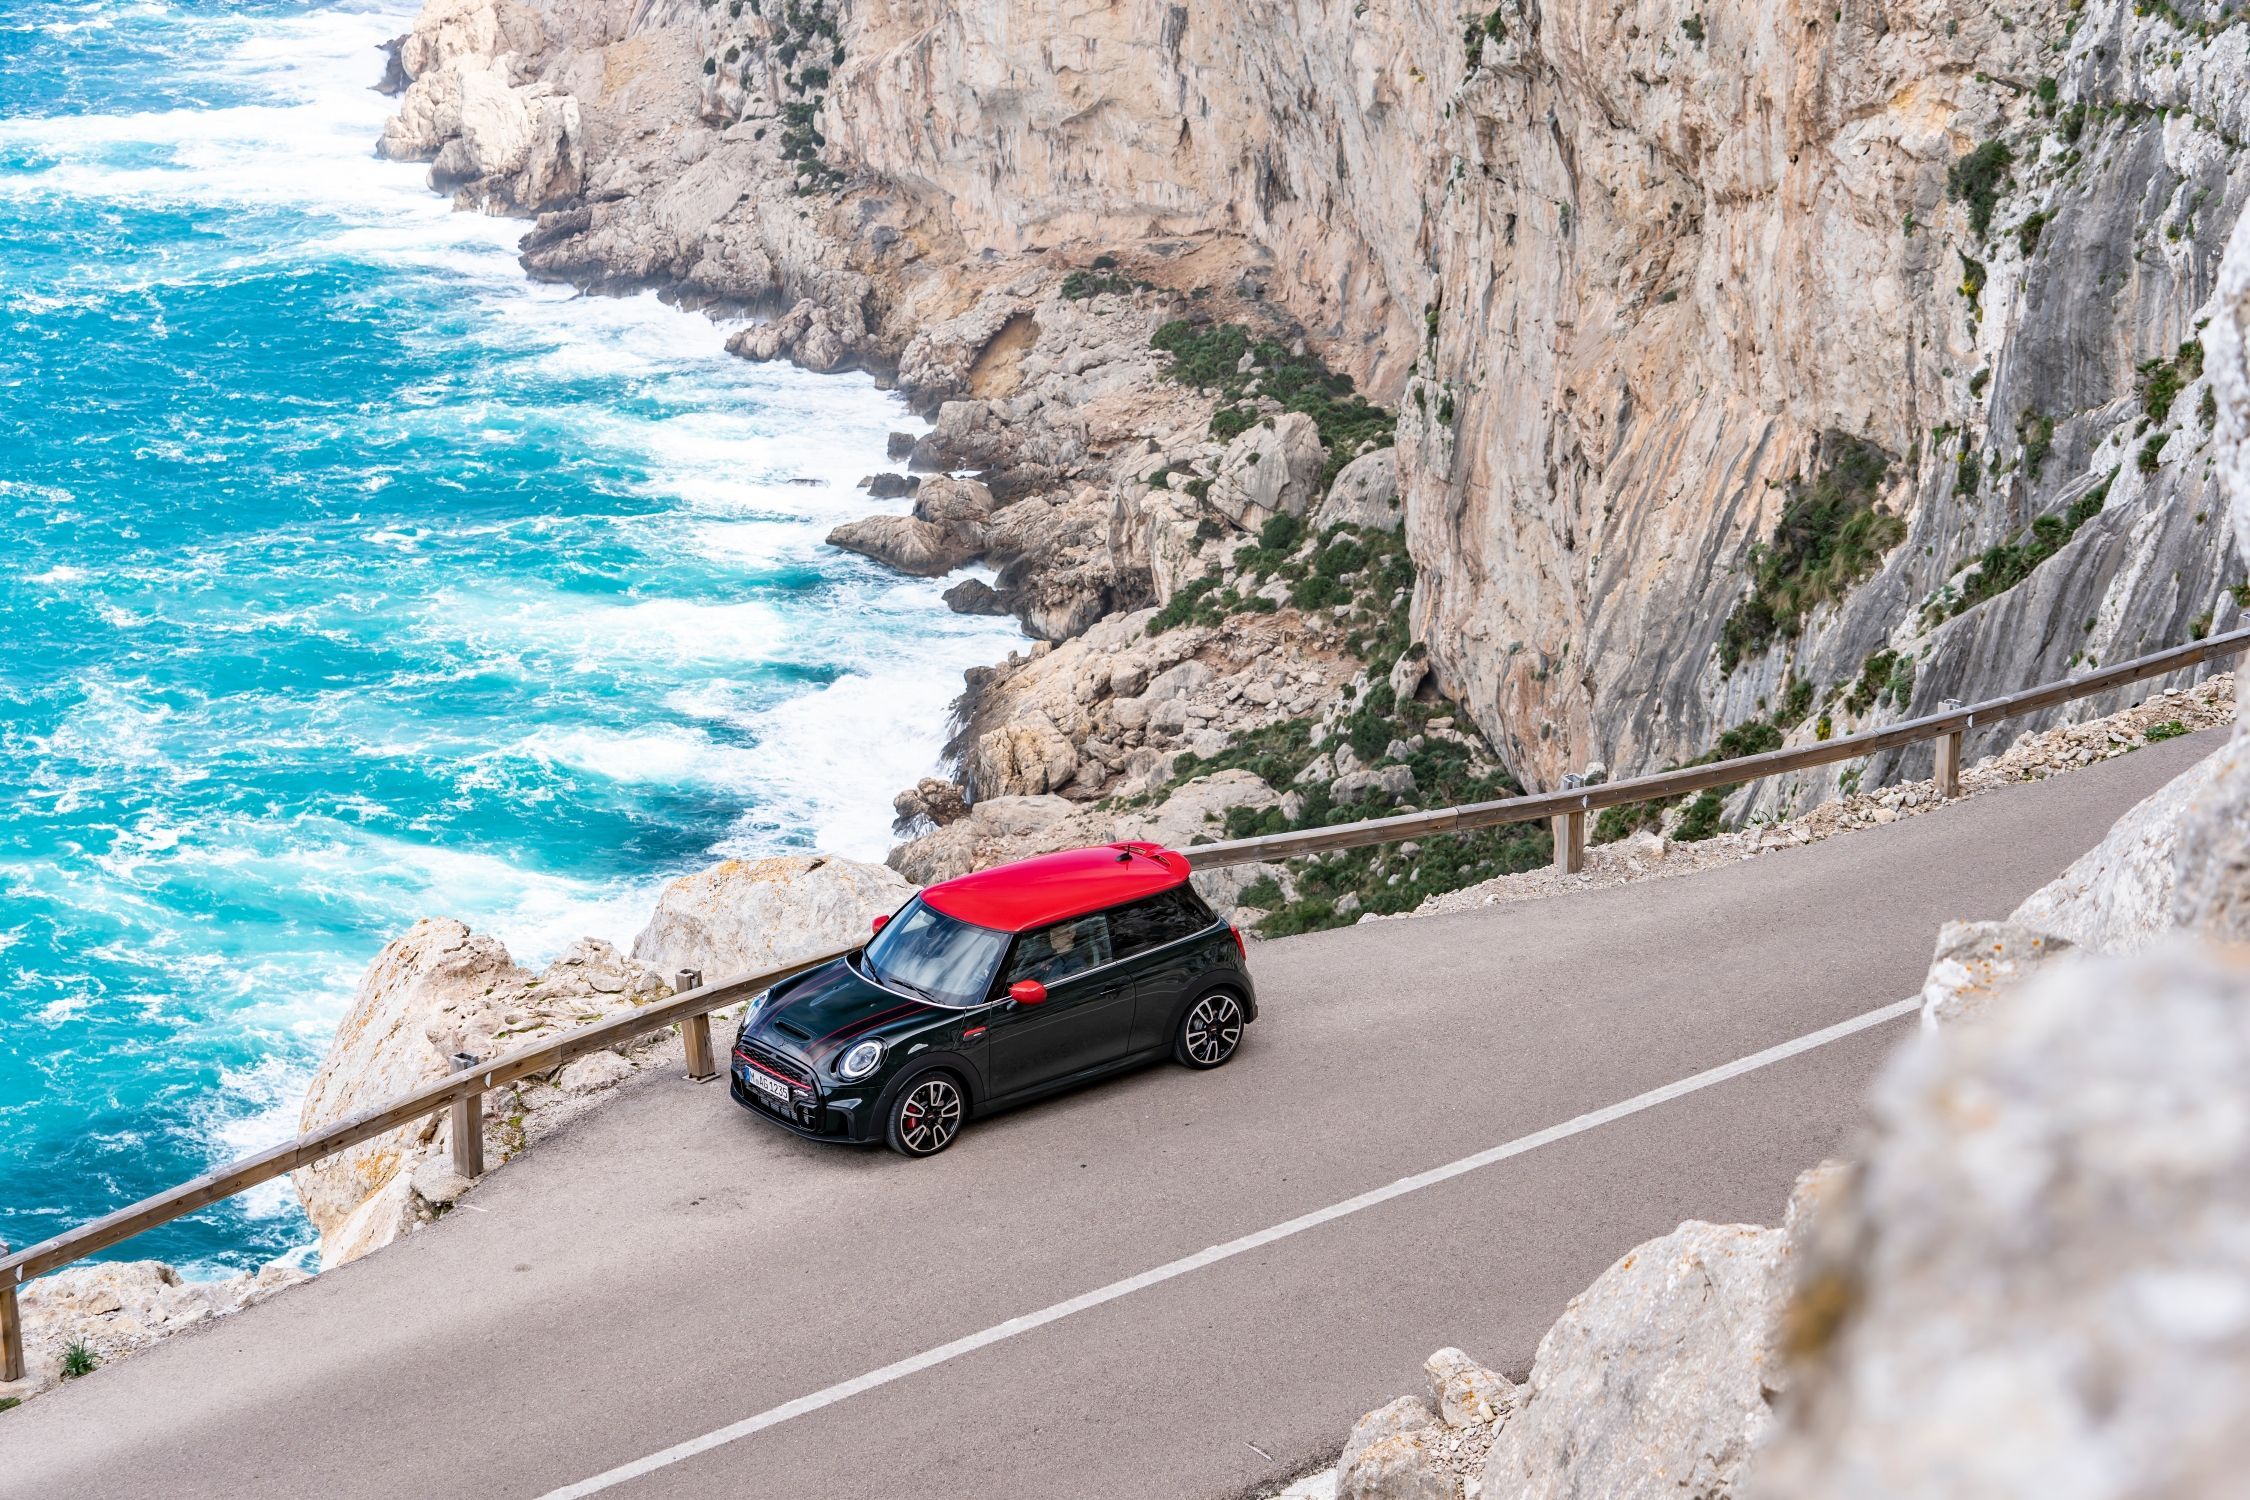 Mini Countryman 2021 review: JCW – Does the John Cooper Works SUV rock?